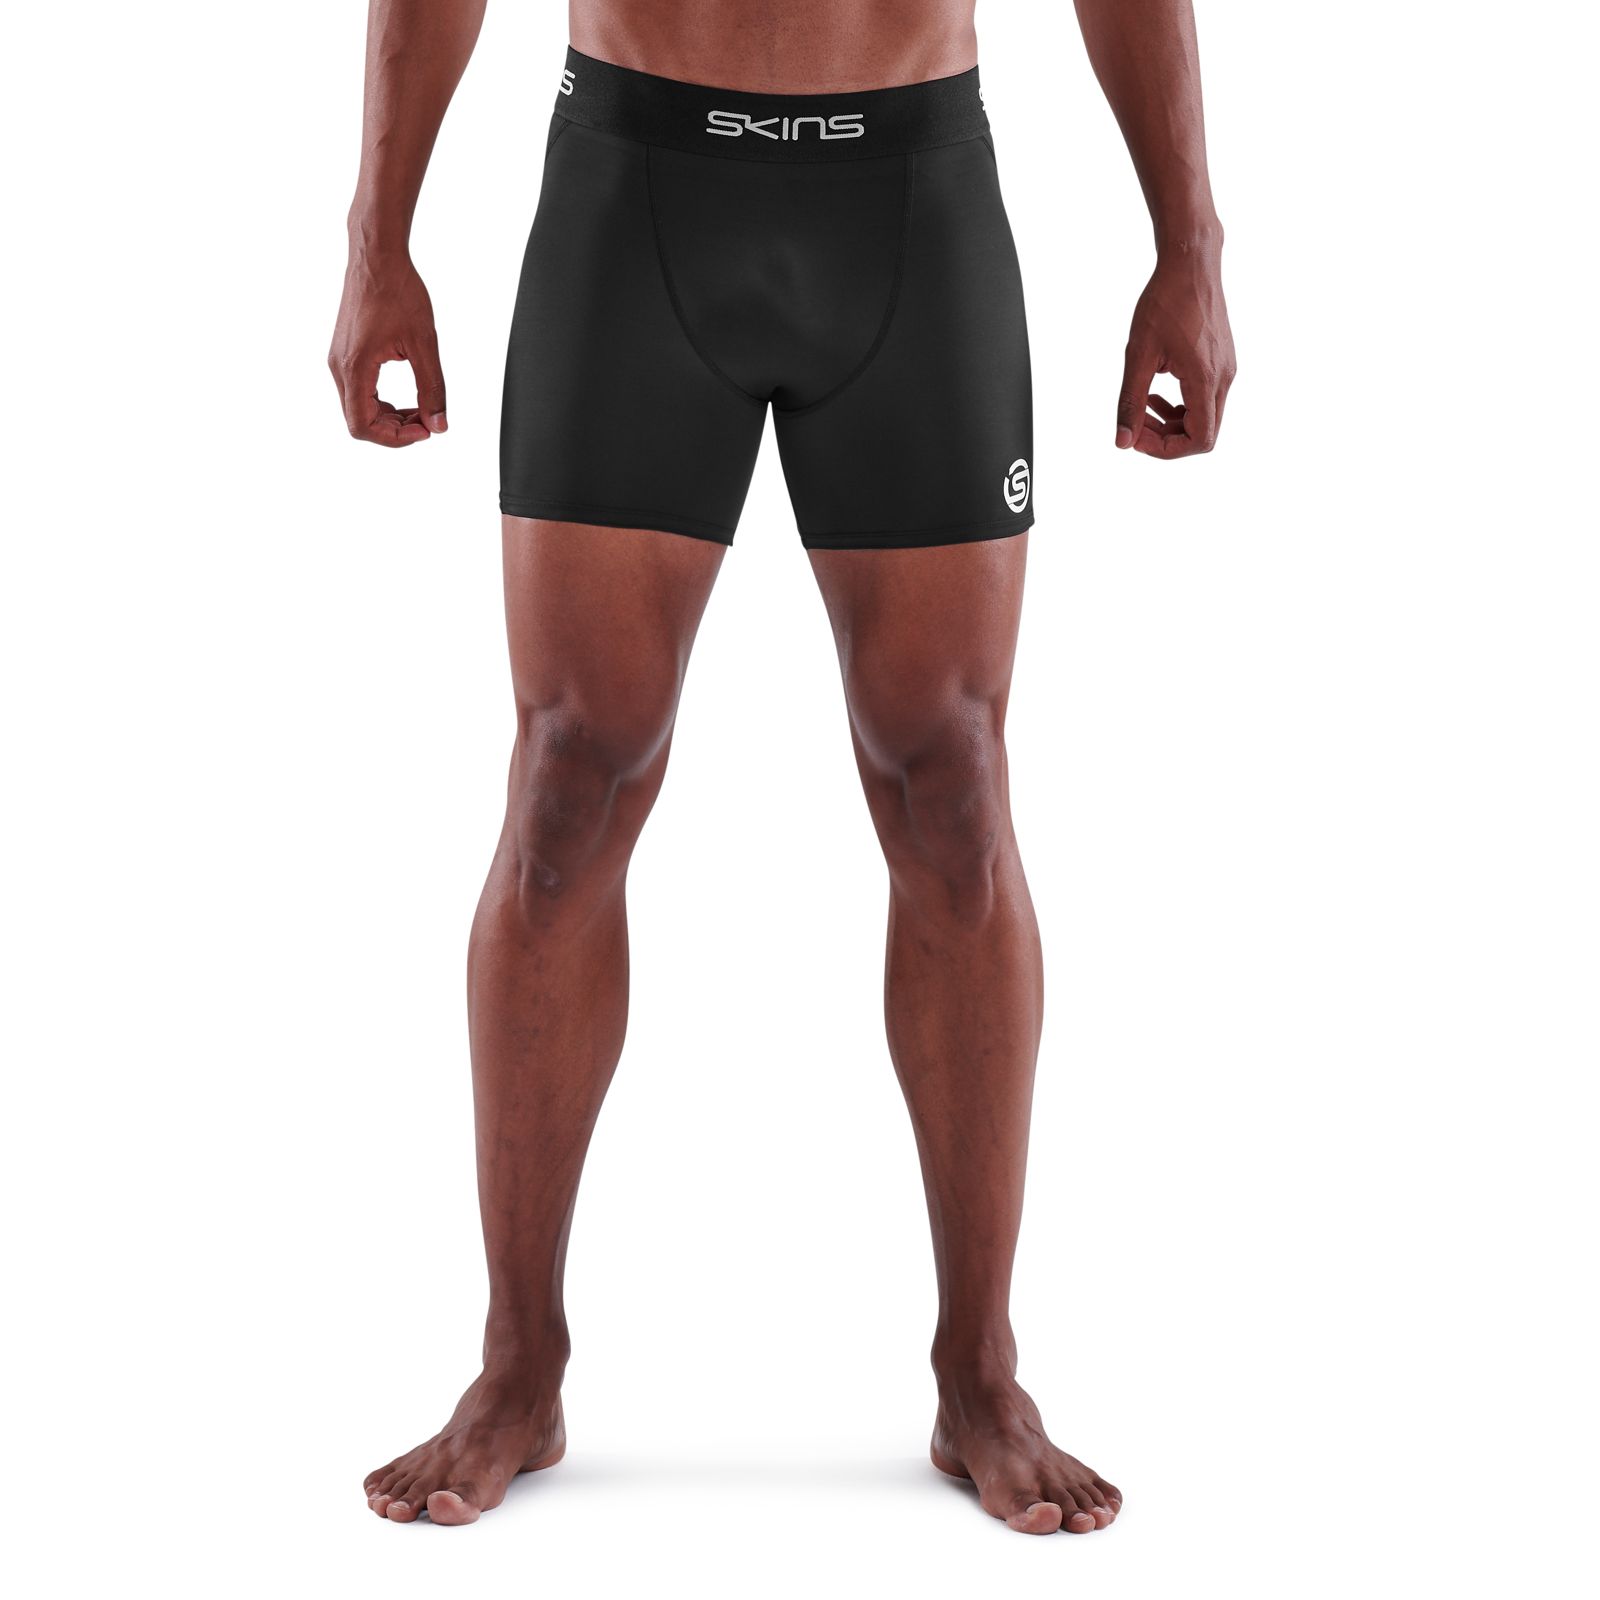  SKINS Men's A200 Compression 1/2 Tights/Shorts,  Black/Graffiti, X-Small : Clothing, Shoes & Jewelry